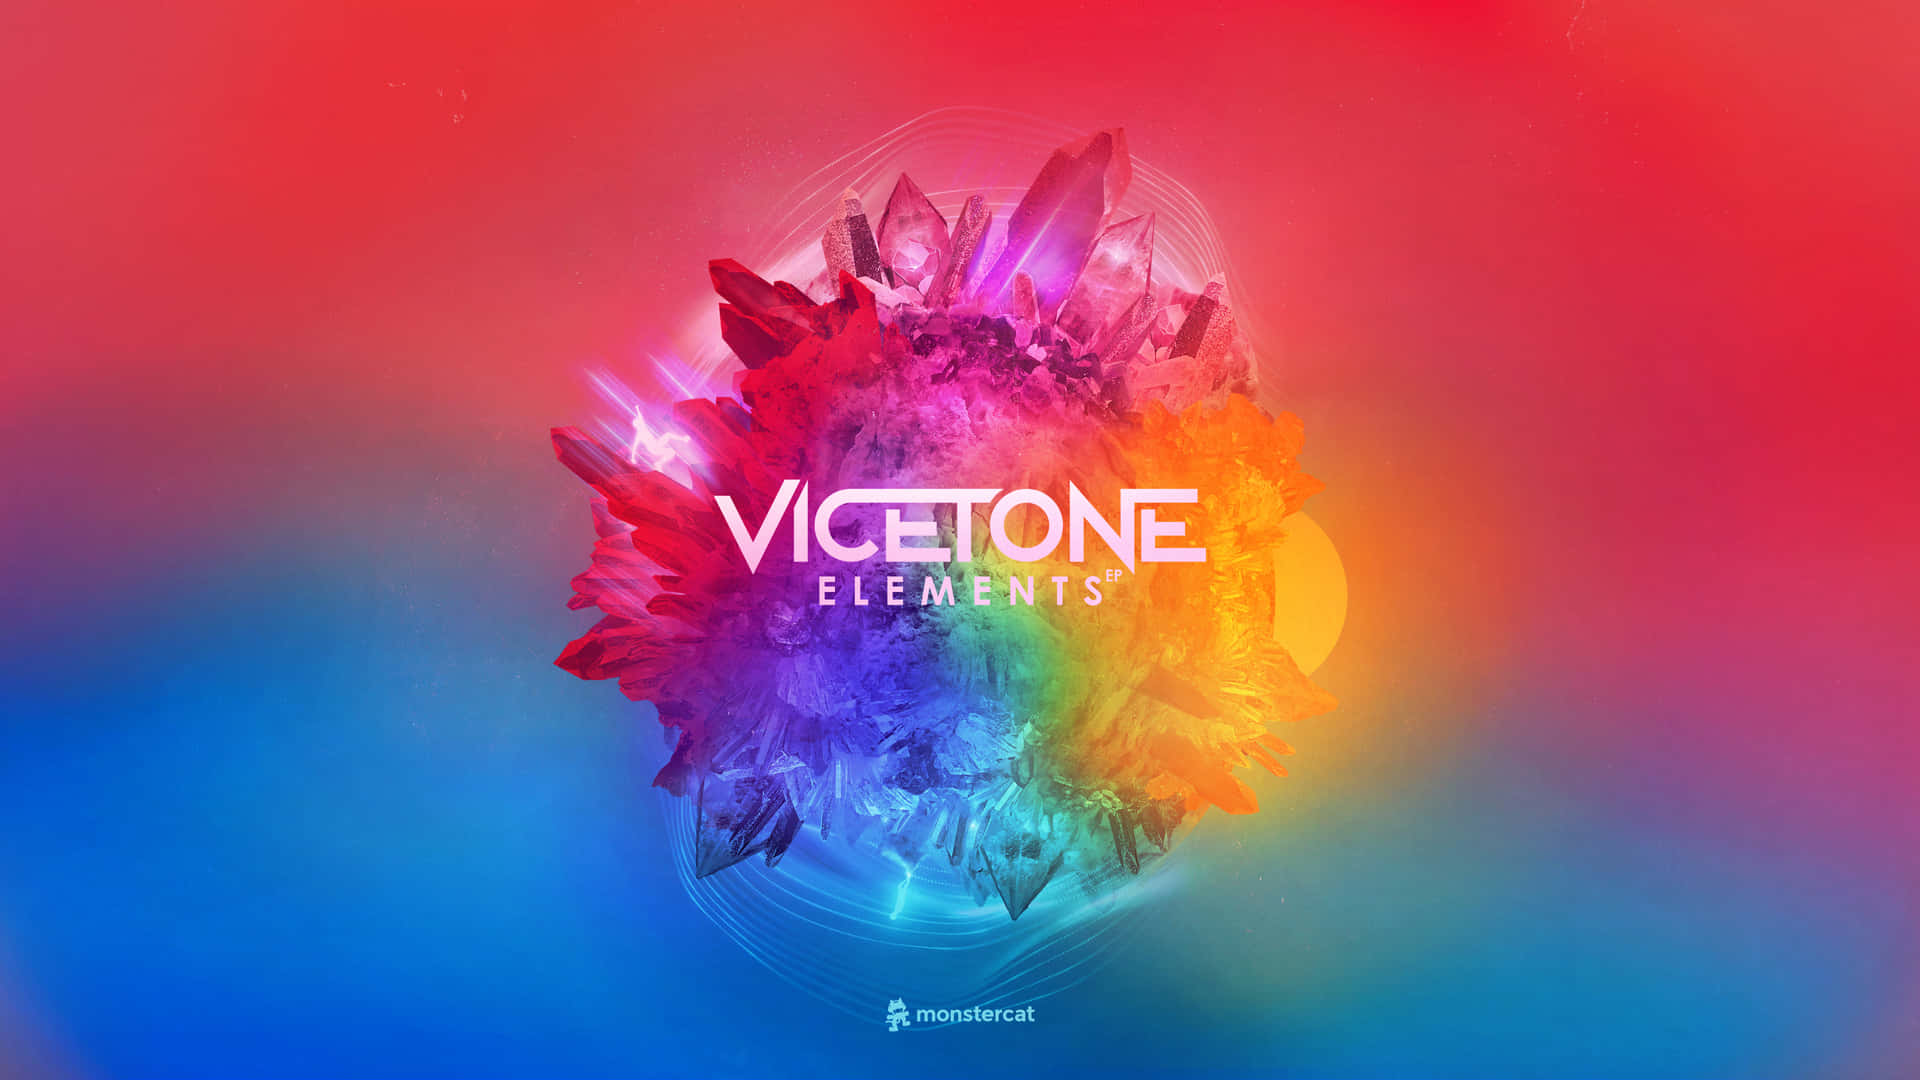 Victone Elements - A Colorful Abstract Design Wallpaper